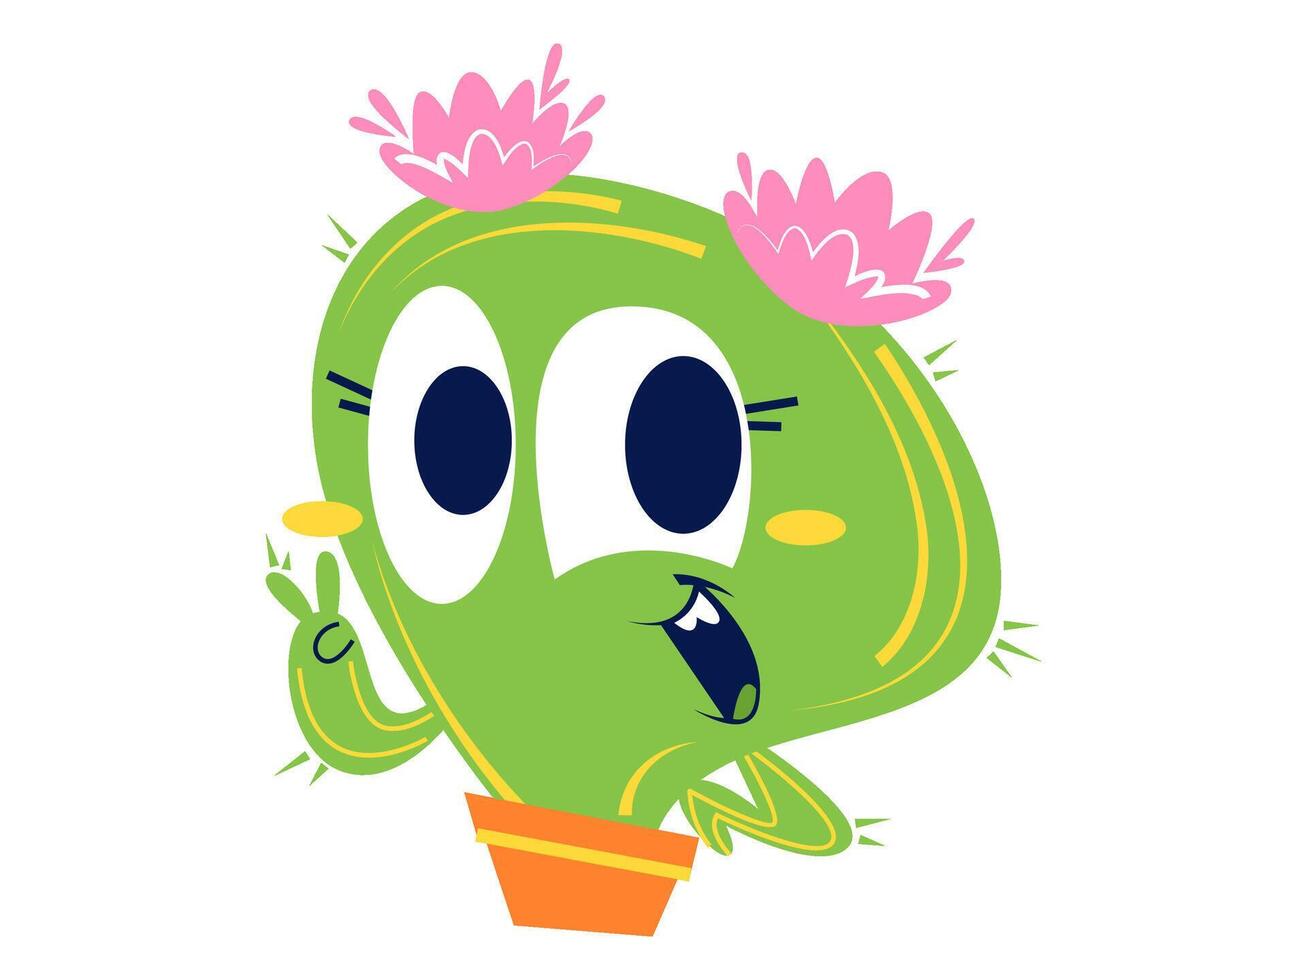 flowers and plants sticker character illustration vector